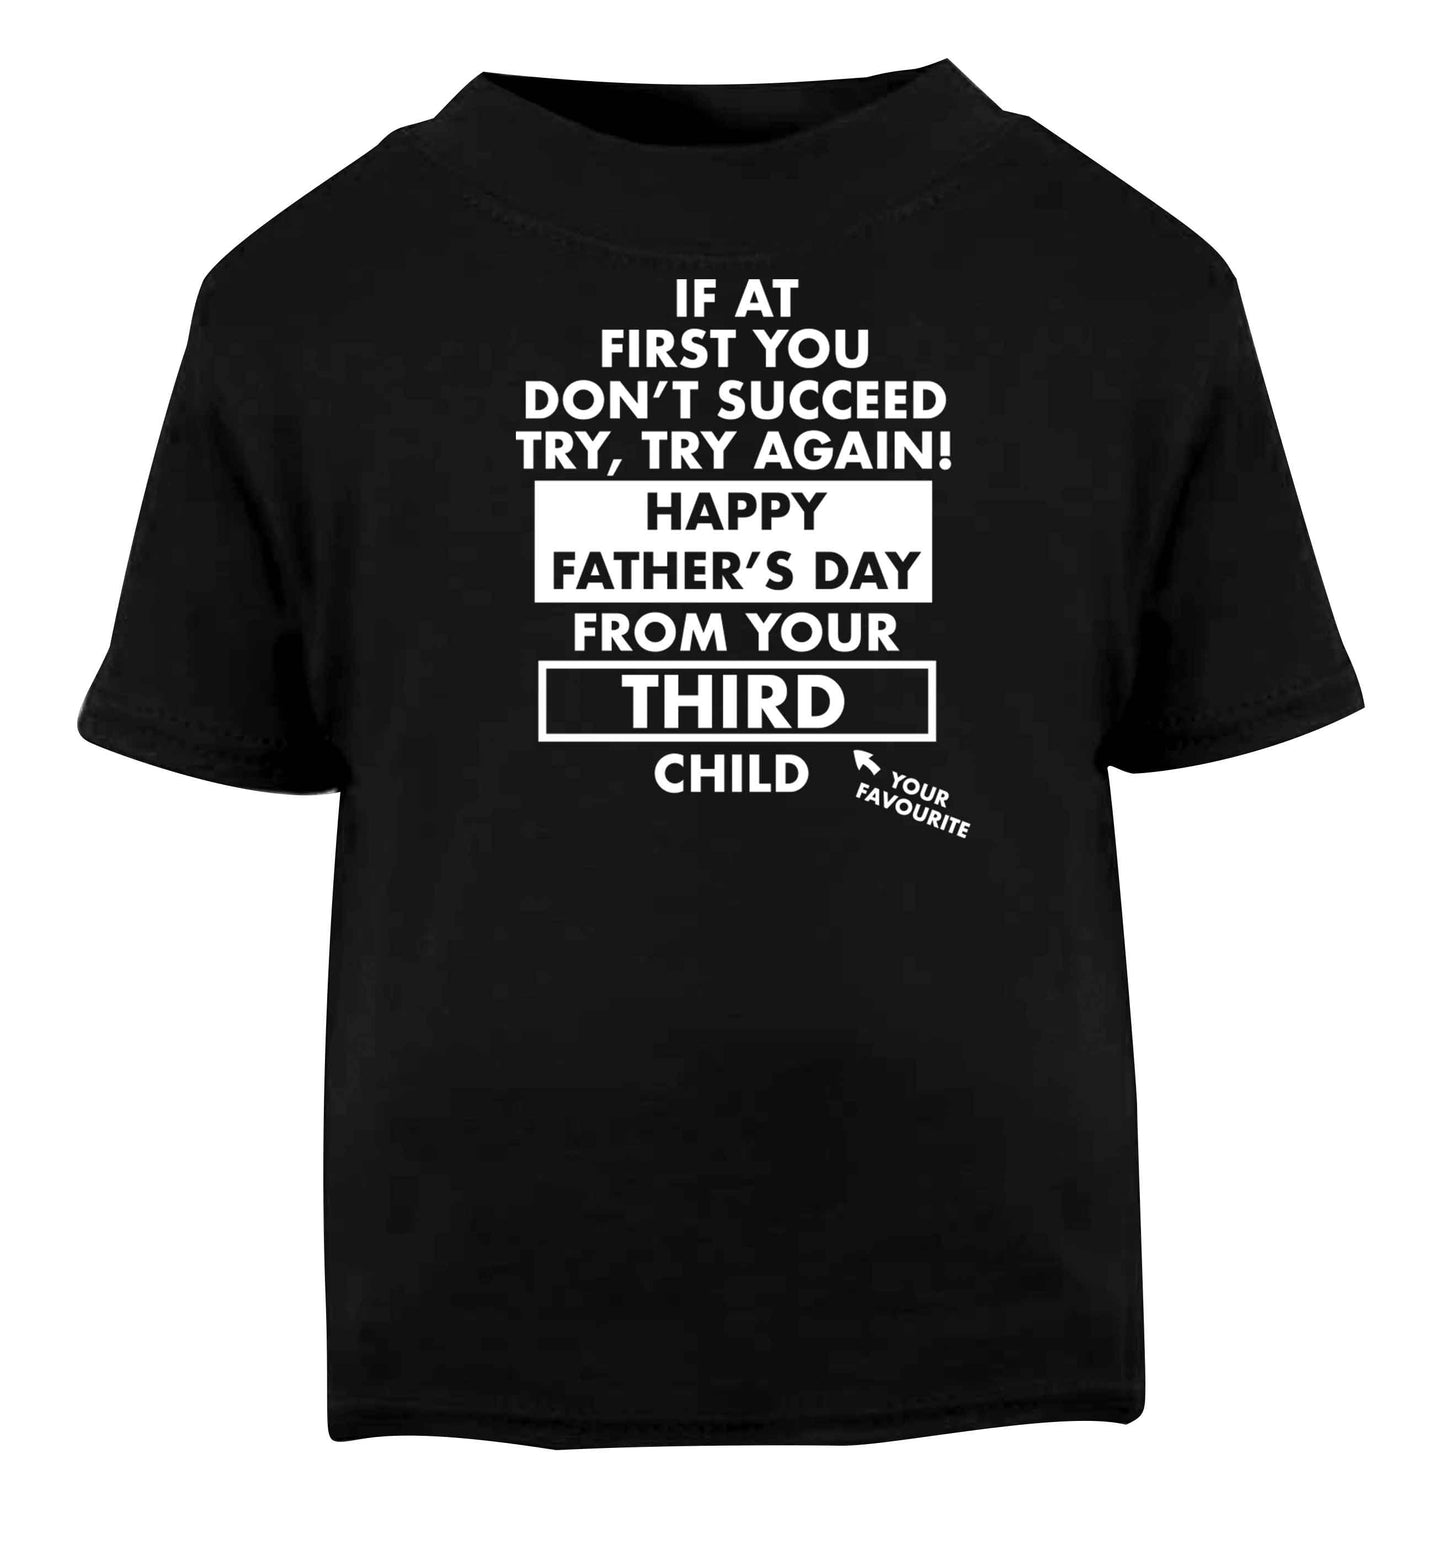 If at first you don't succeed try, try again Happy Father's day from your third child! Black baby toddler Tshirt 2 years